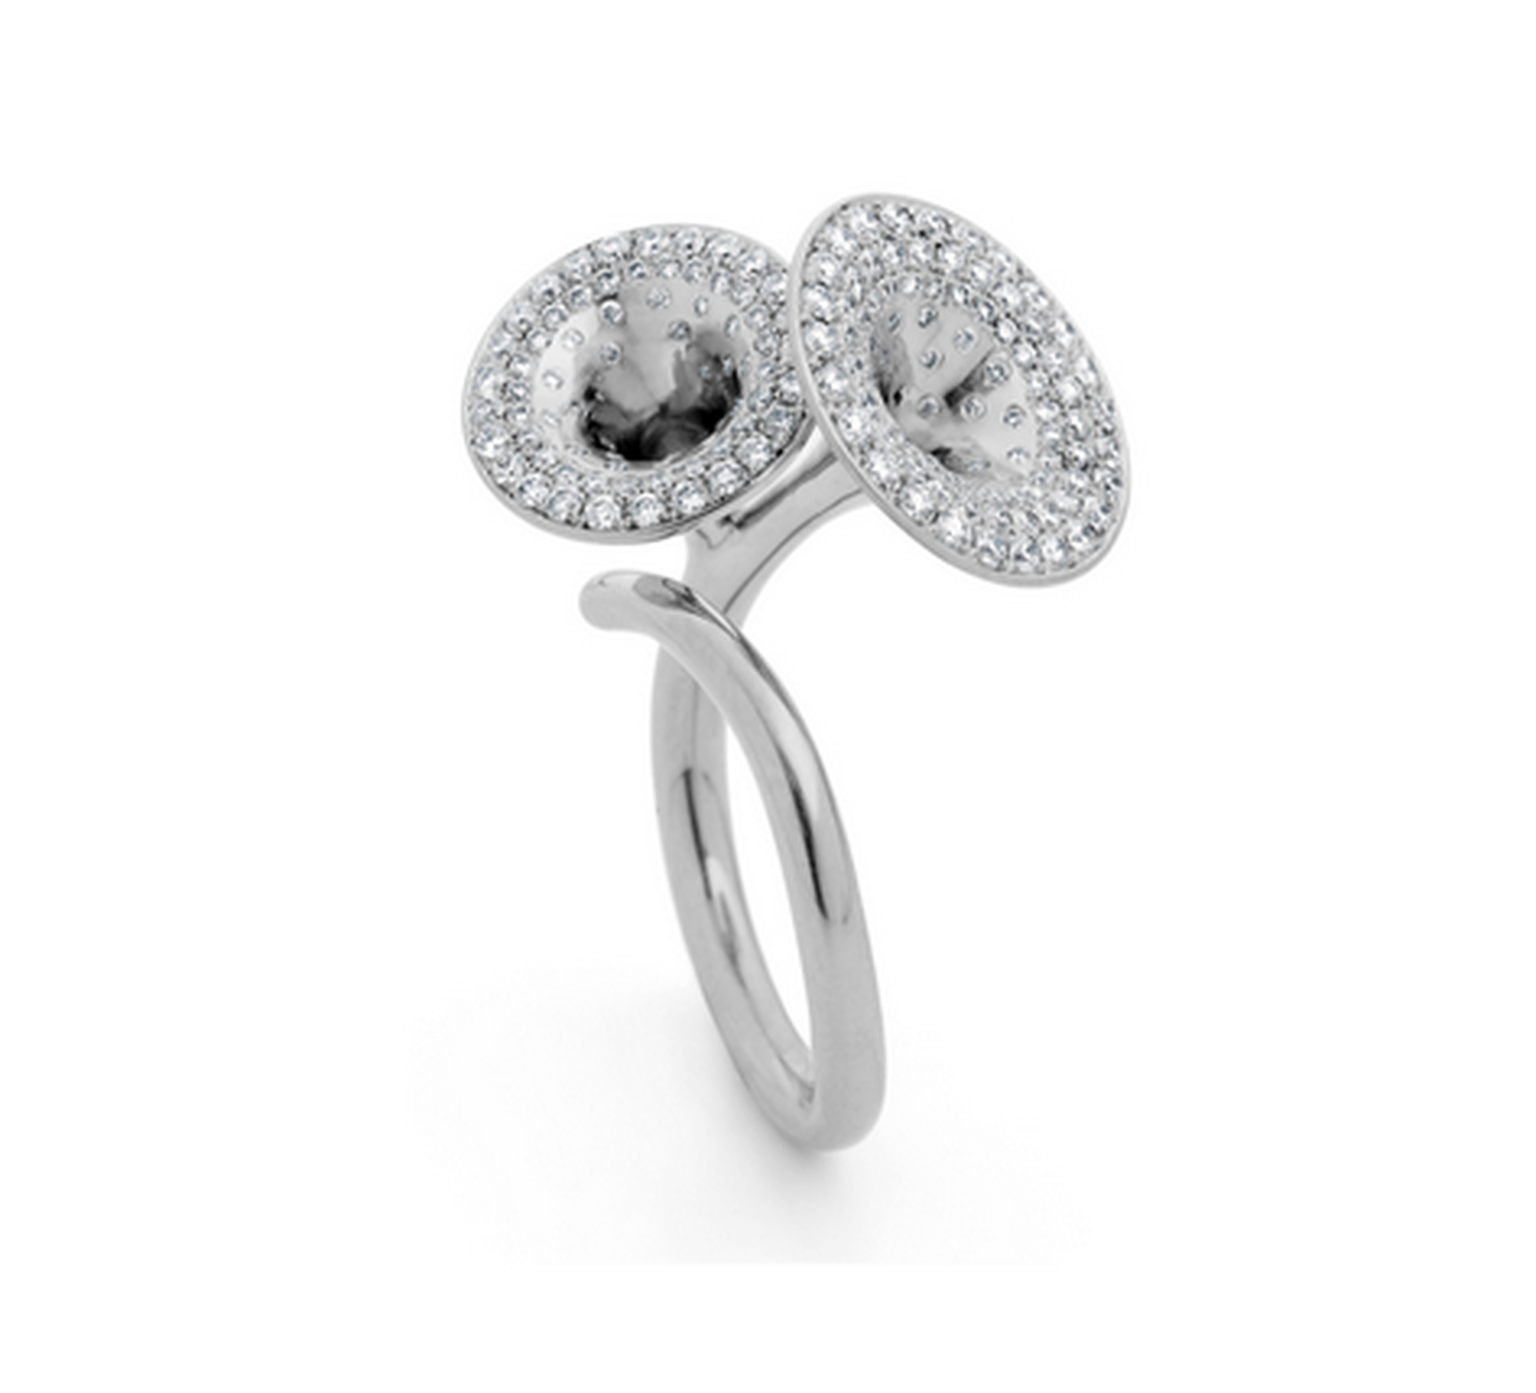 Jessica Poole Double Jubilee Dress ring in white gold, micro pavé set with 1.05ct diamonds.